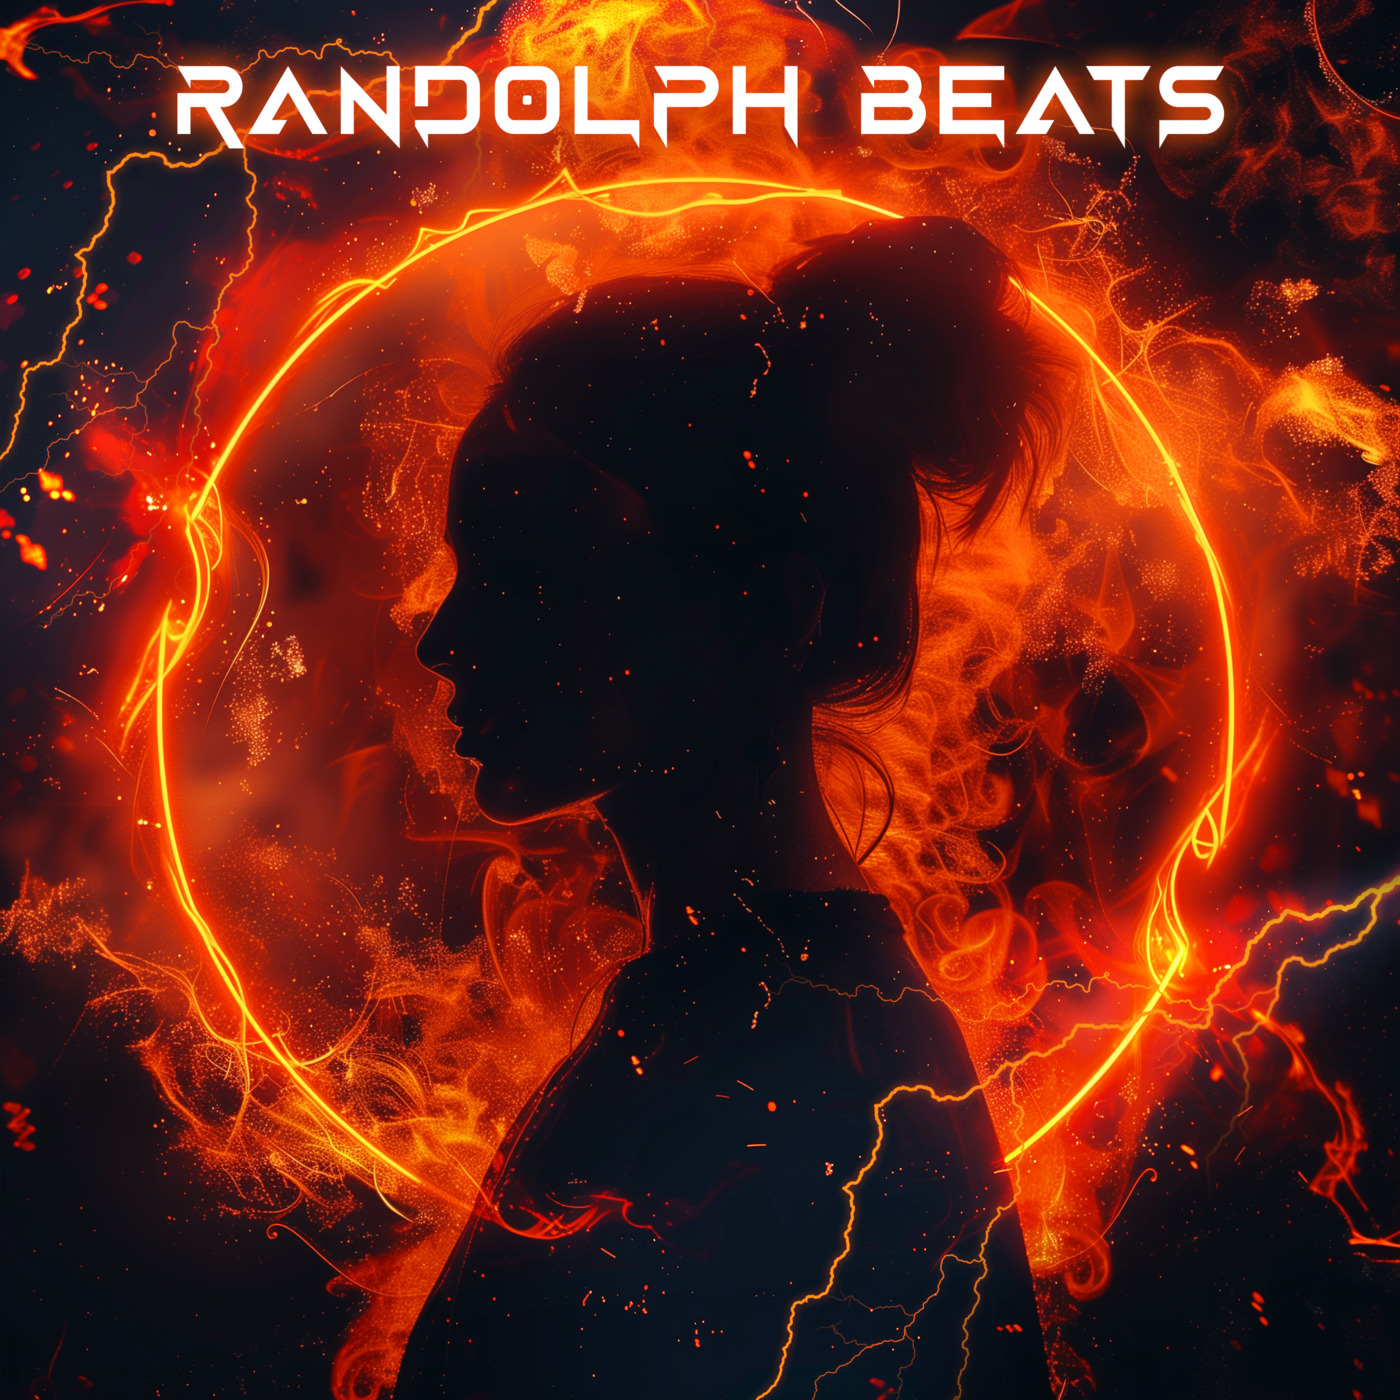 Episode 145: RANDOLPH BEATS - EASY REMIX AVAILABLE ON SPOTIFY